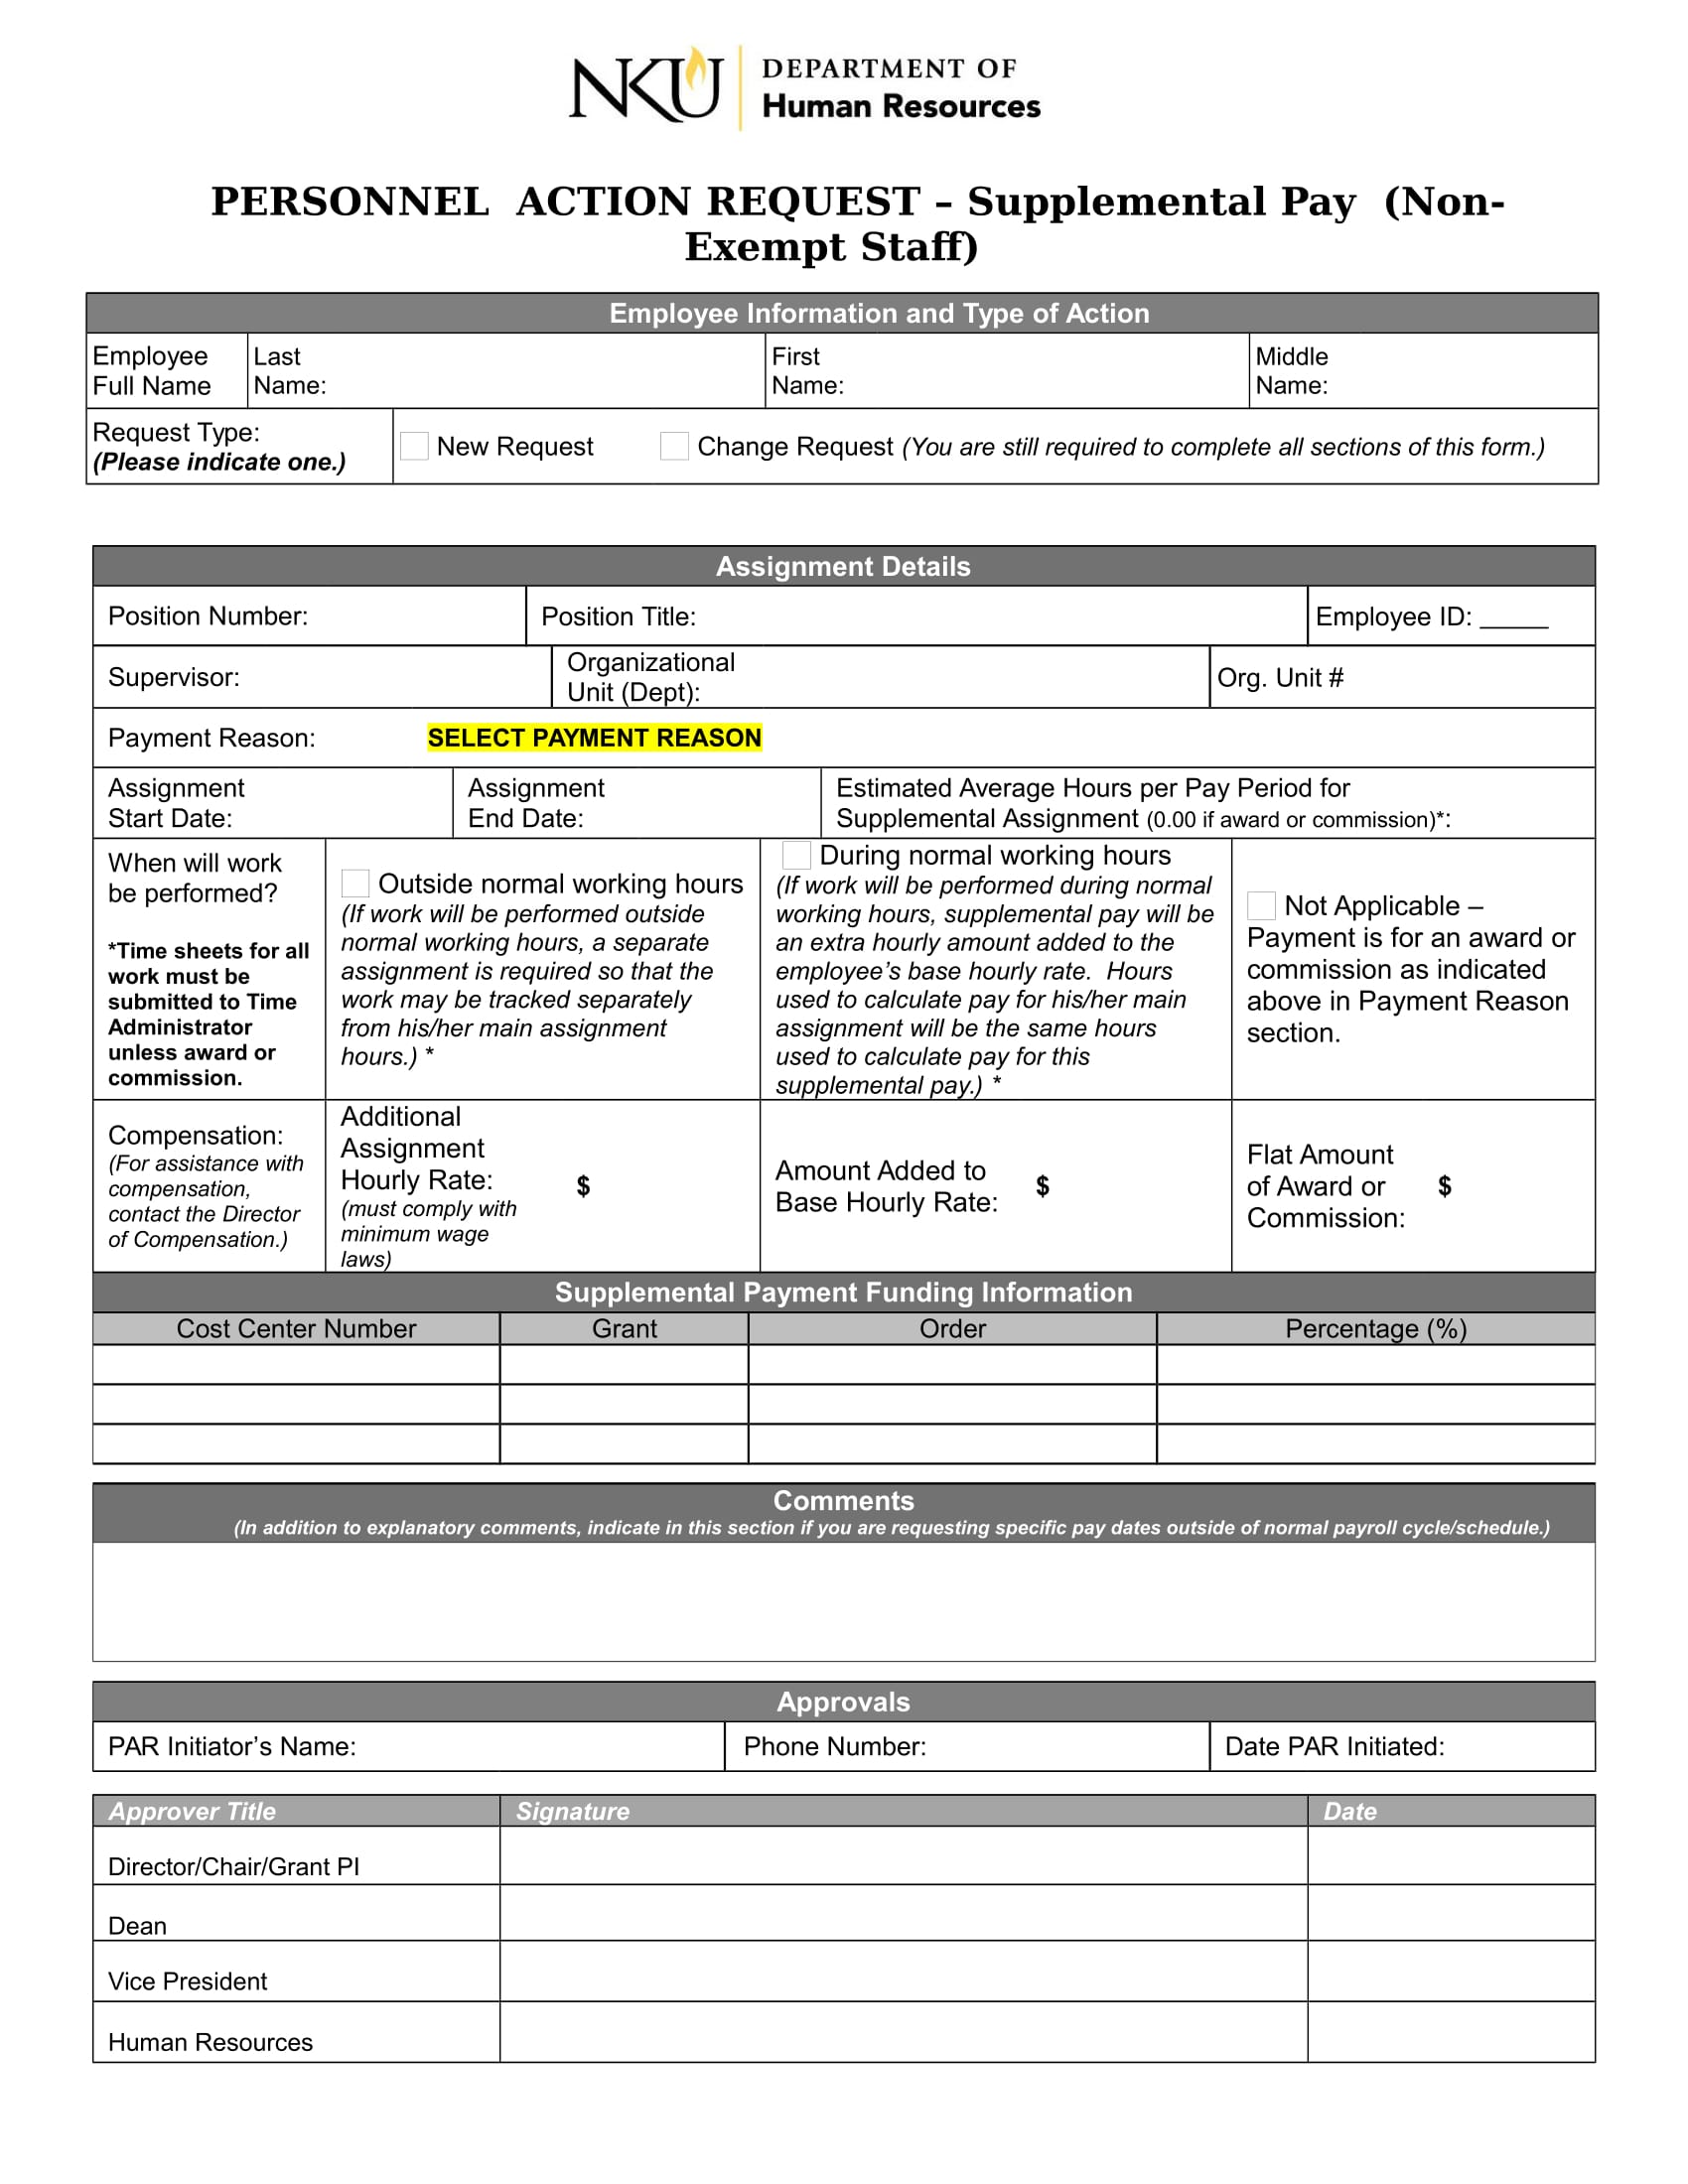 personnel action request form supplemental pay 11